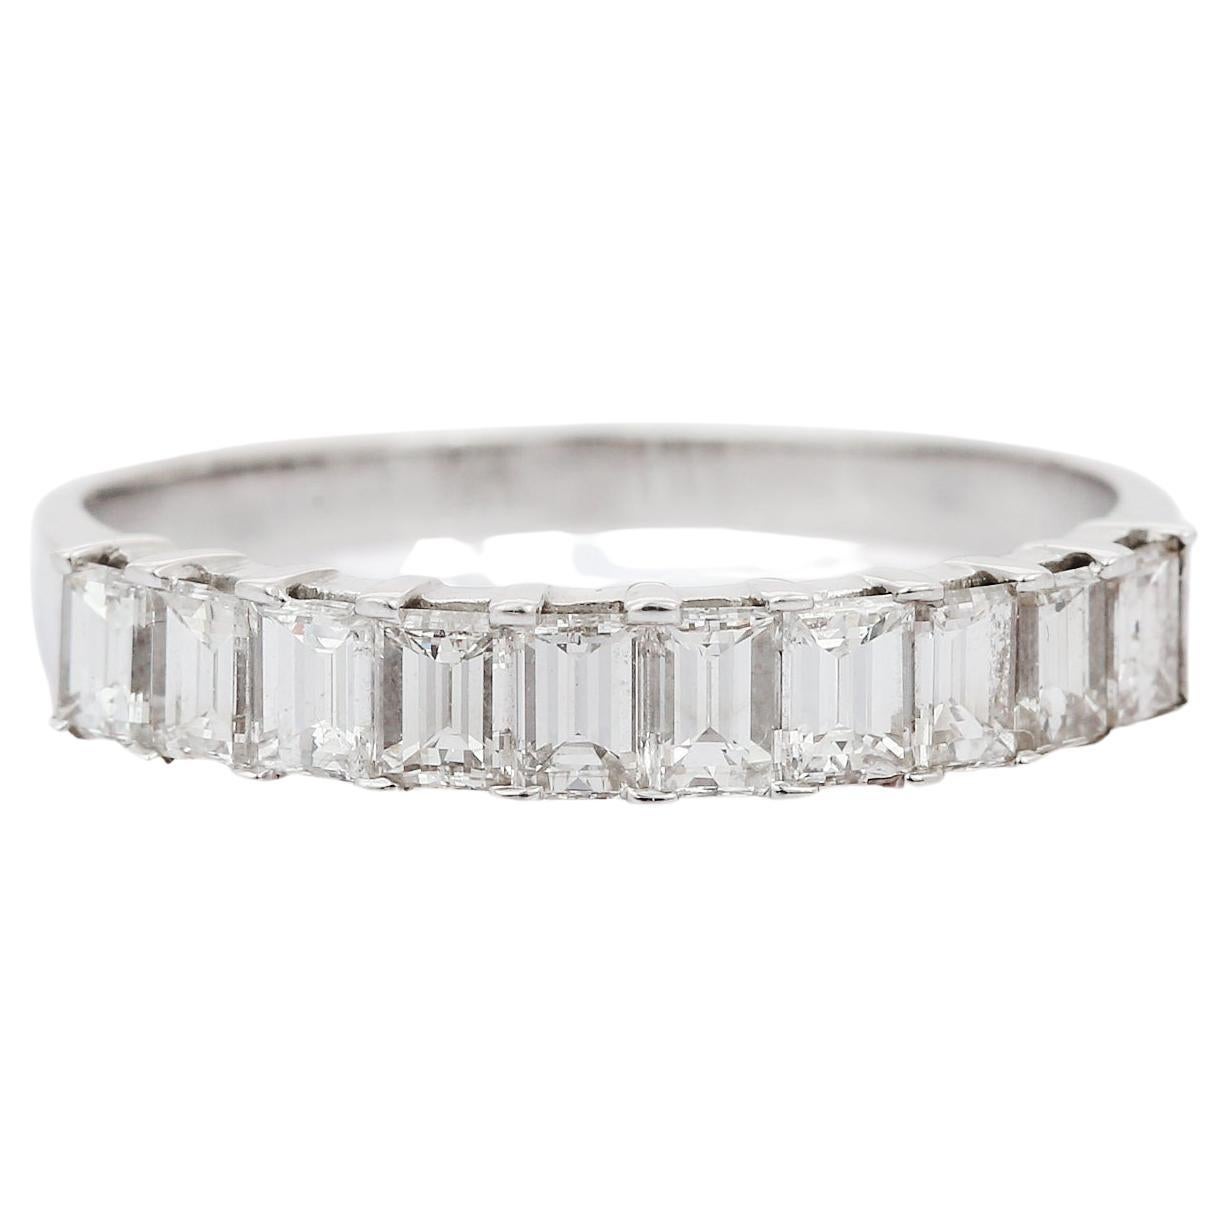 For Sale:  1.25 Carat Emerald Cut Diamond Half Eternity Band Ring in 18K White Gold